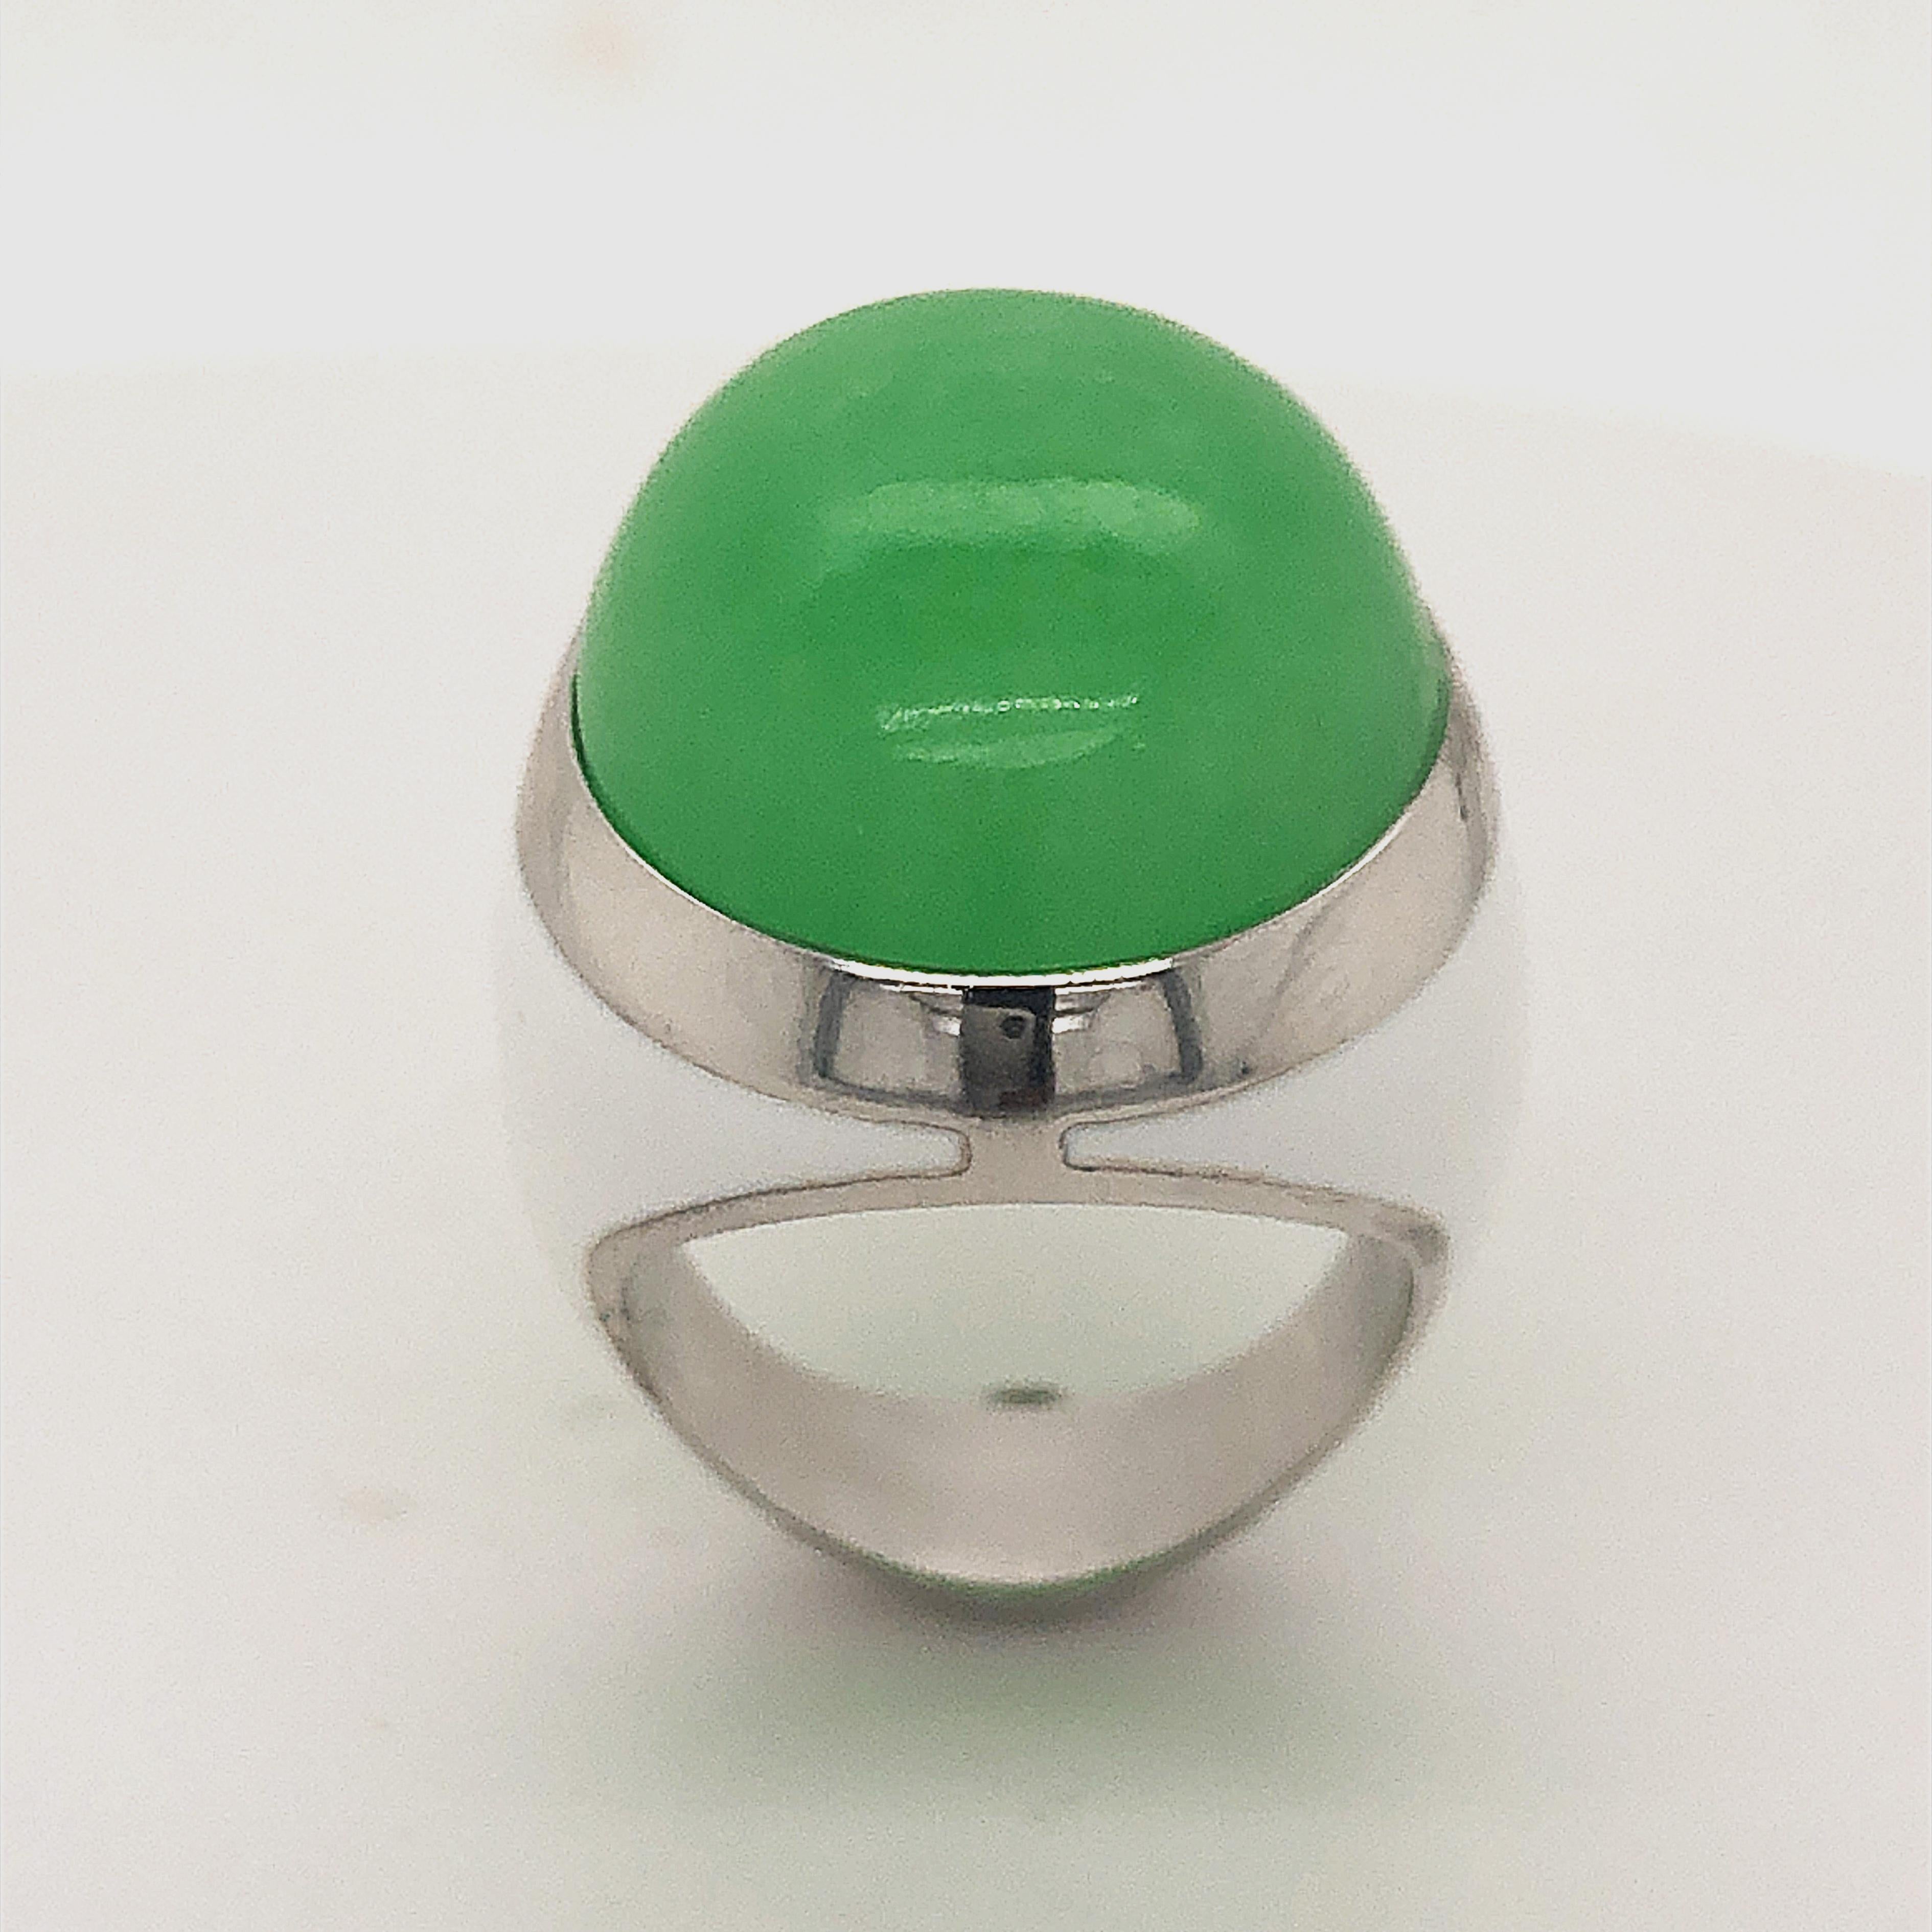 Contemporary Berca 21.2 Kt Green Jade White Hand Enameled Sterling Silver Cocktail Ring